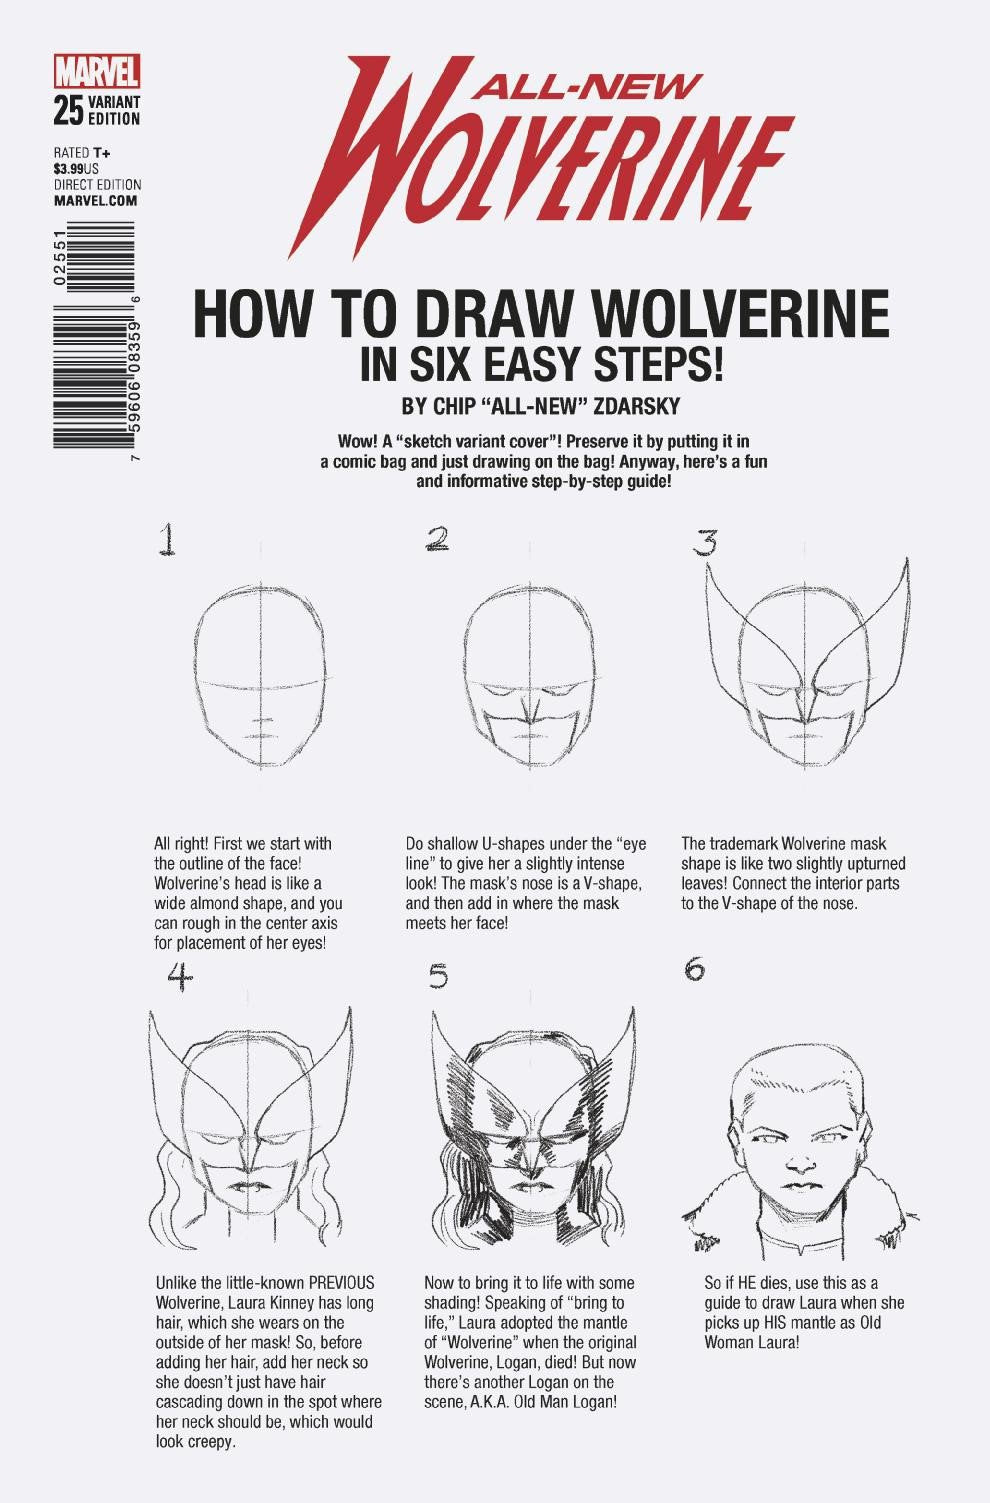 ALL NEW WOLVERINE #25 ZDARSKY HOW TO DRAW VAR LEG COVER